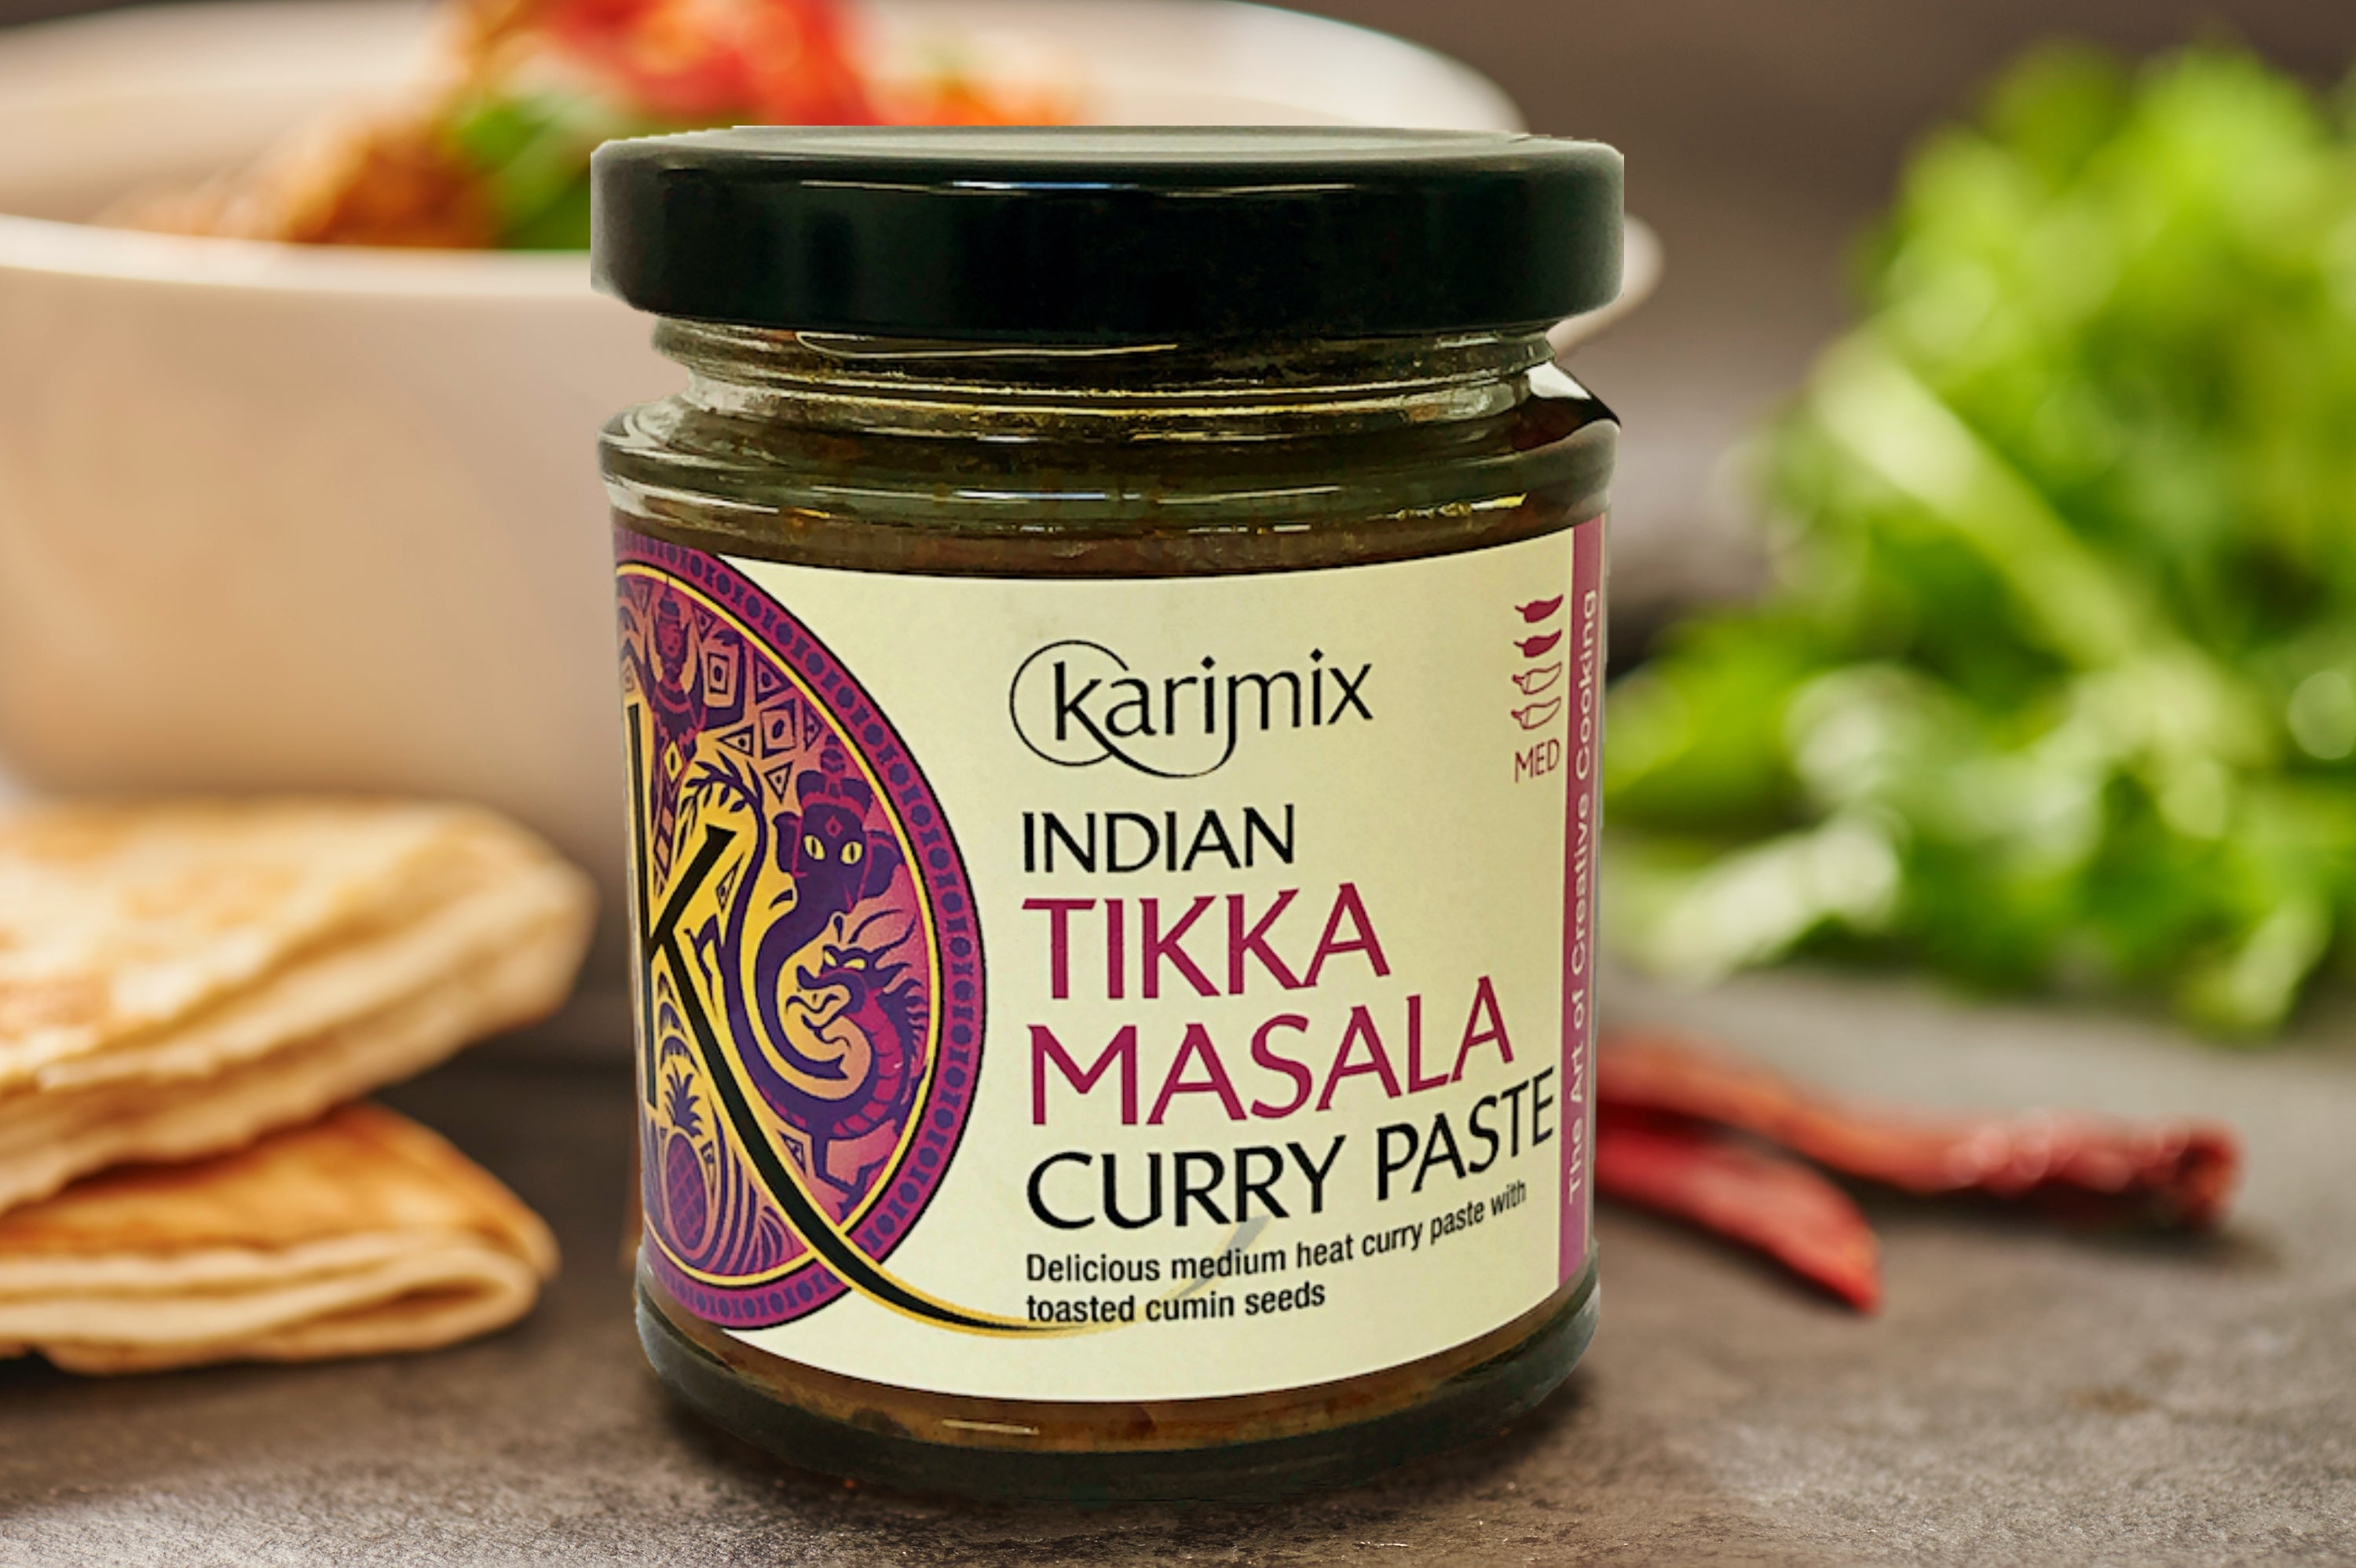 Tikka Masala Curry Paste | Artisan cooking products made in the UK